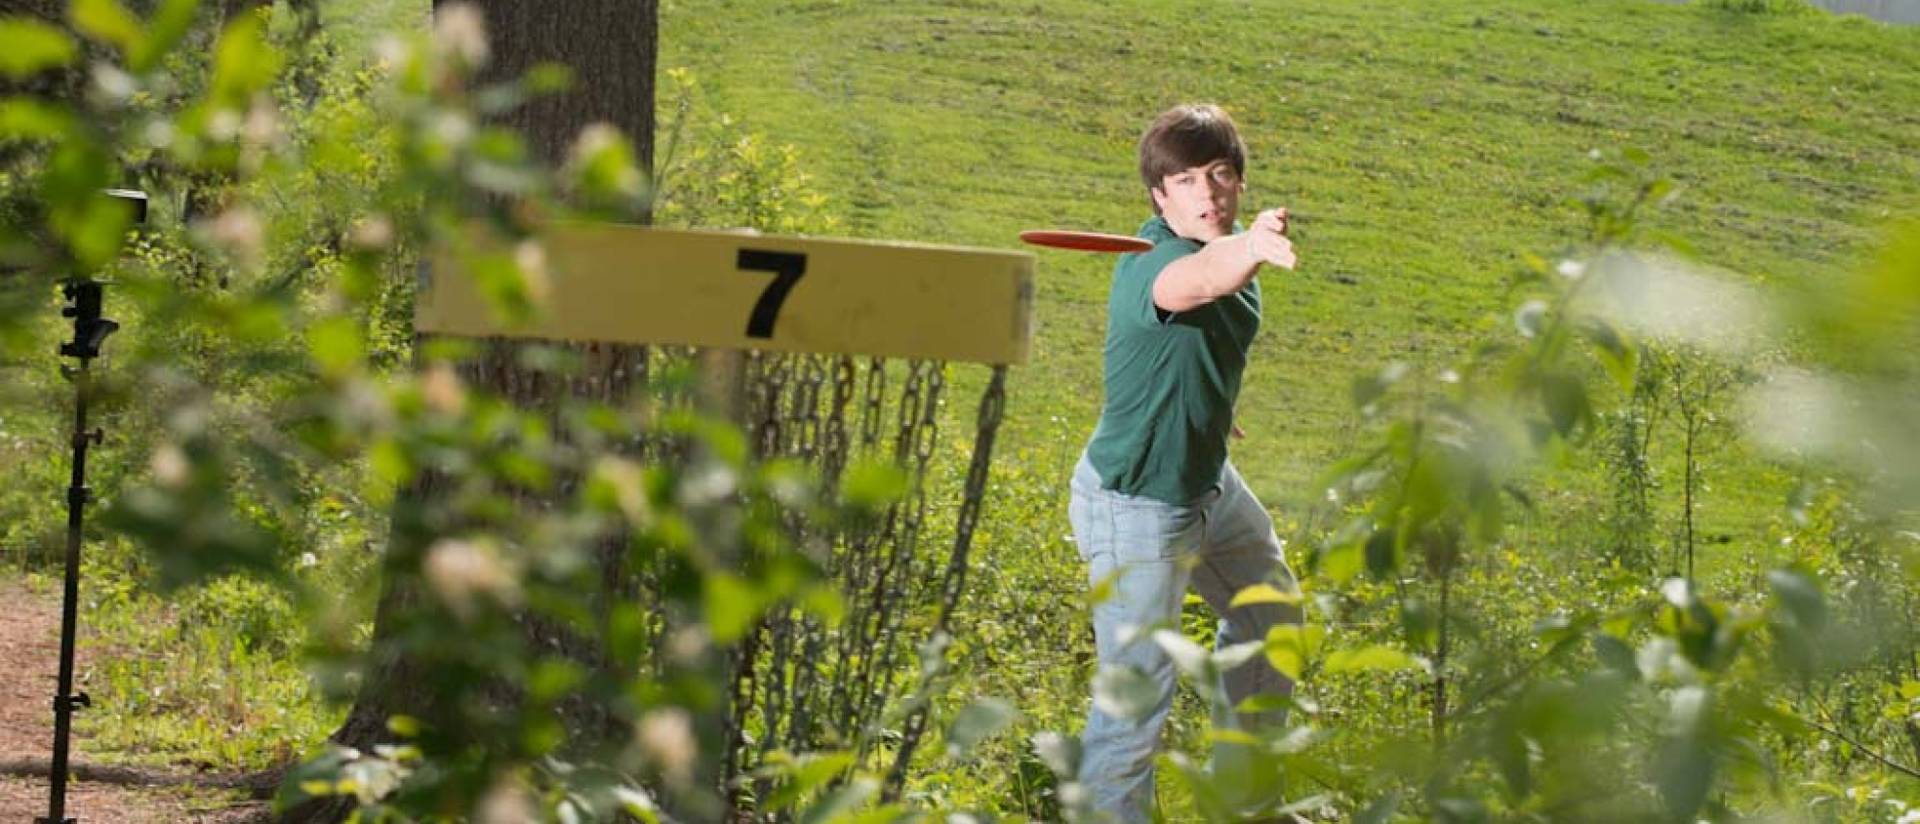 Student playing disc golf